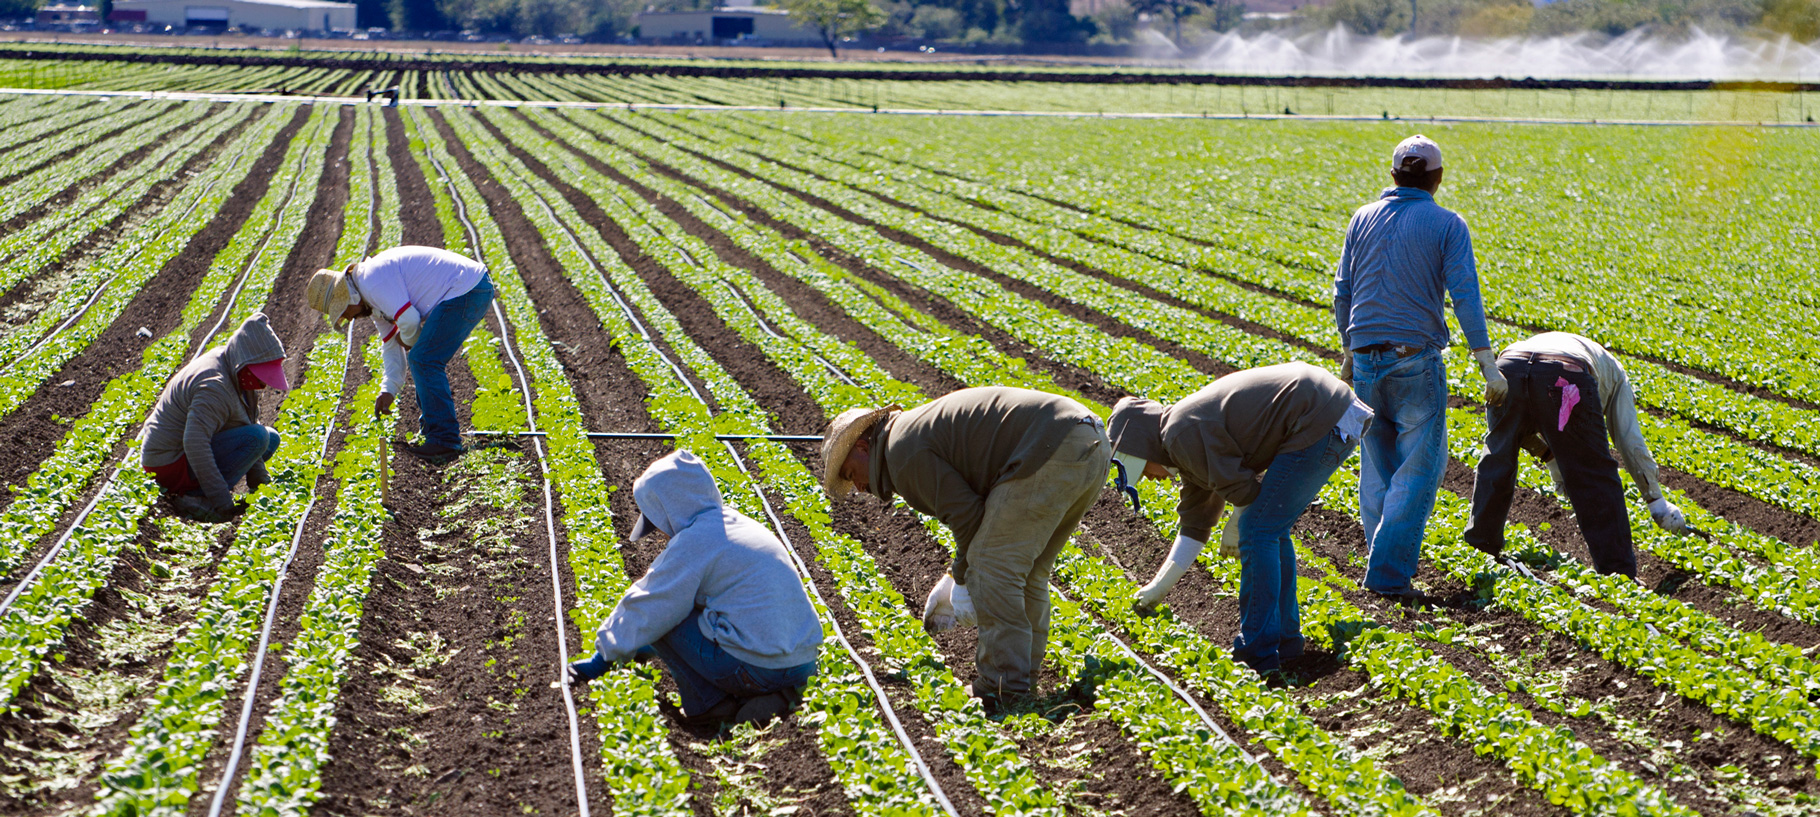 illegal immigrants working for low wages